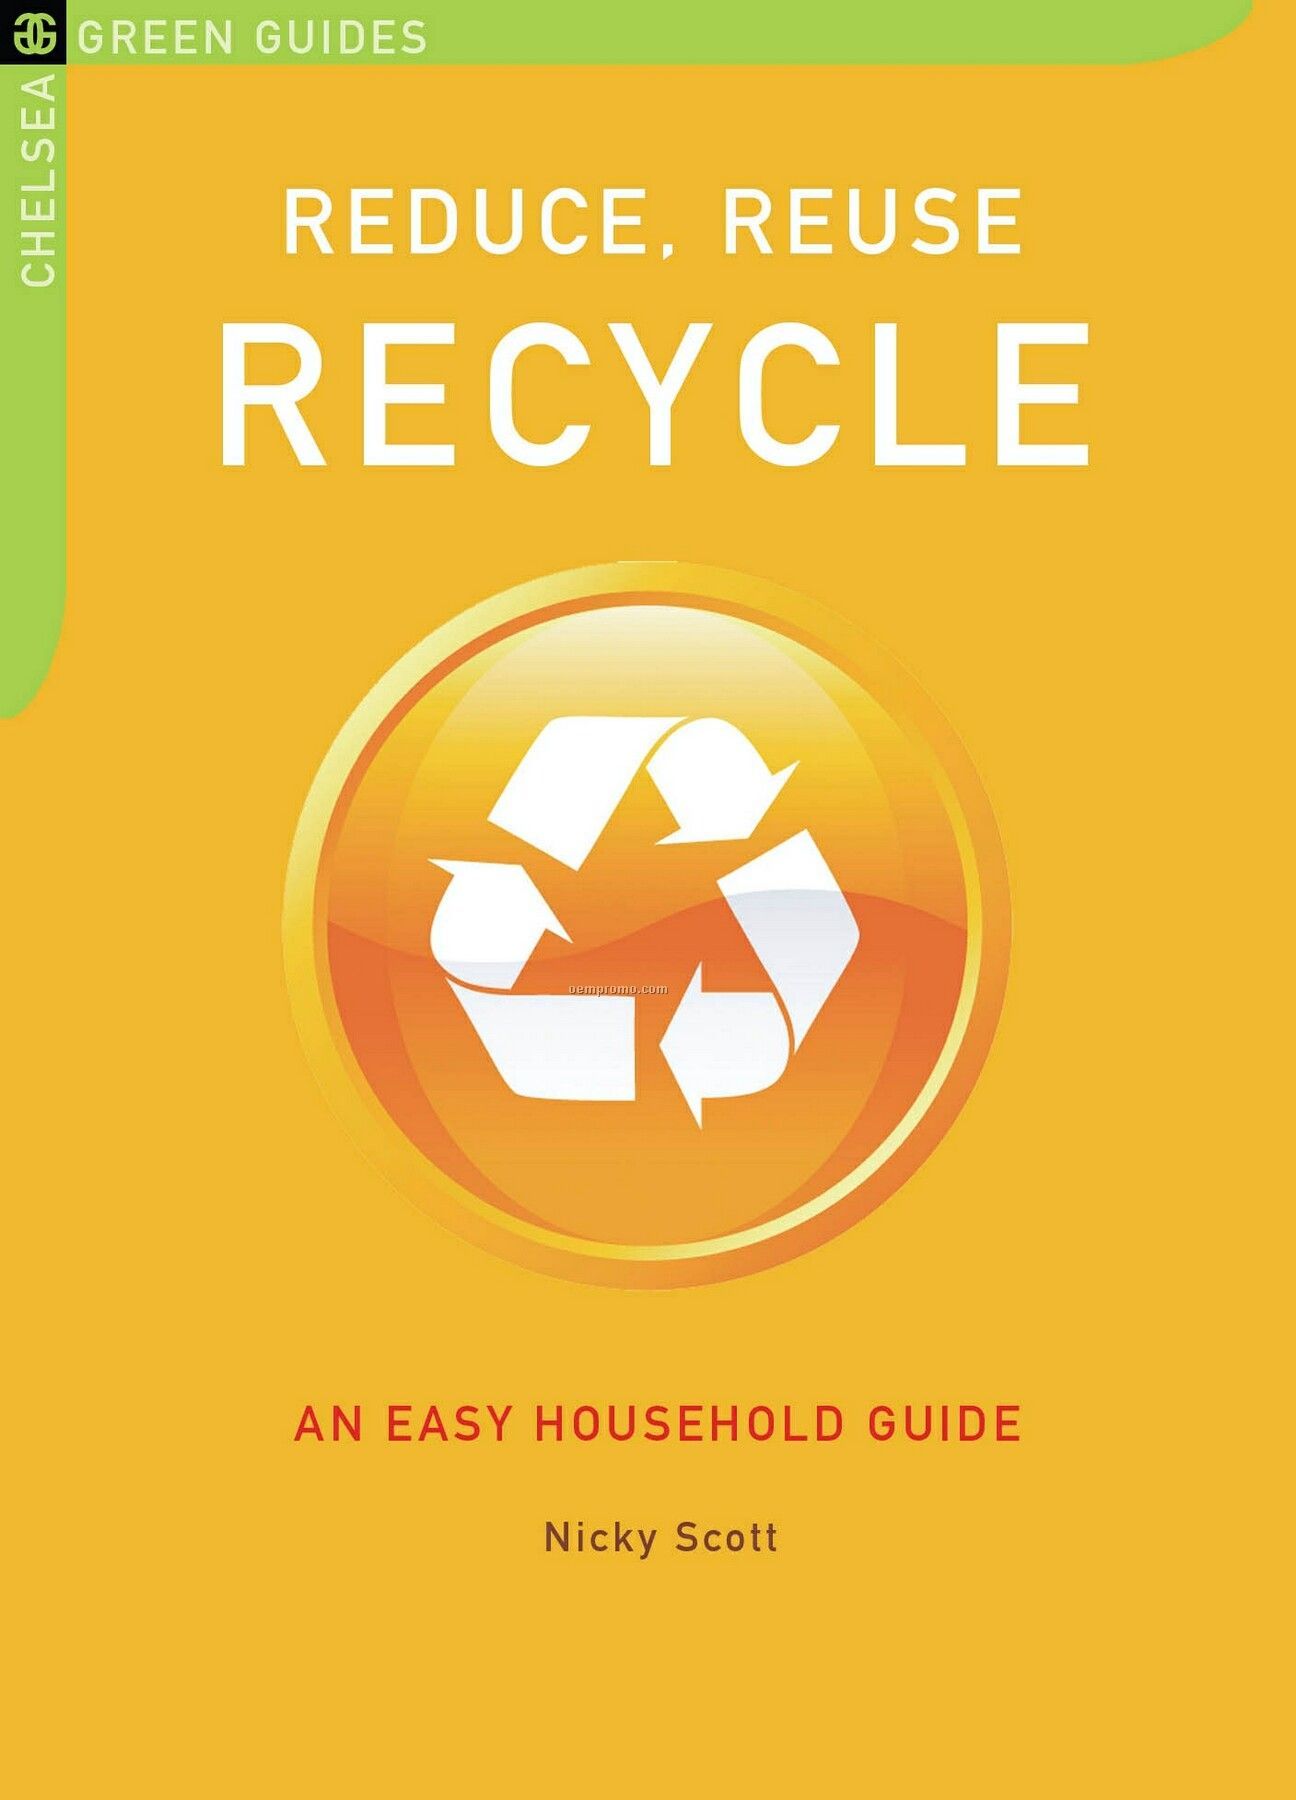 Recycle - Little Green Guides